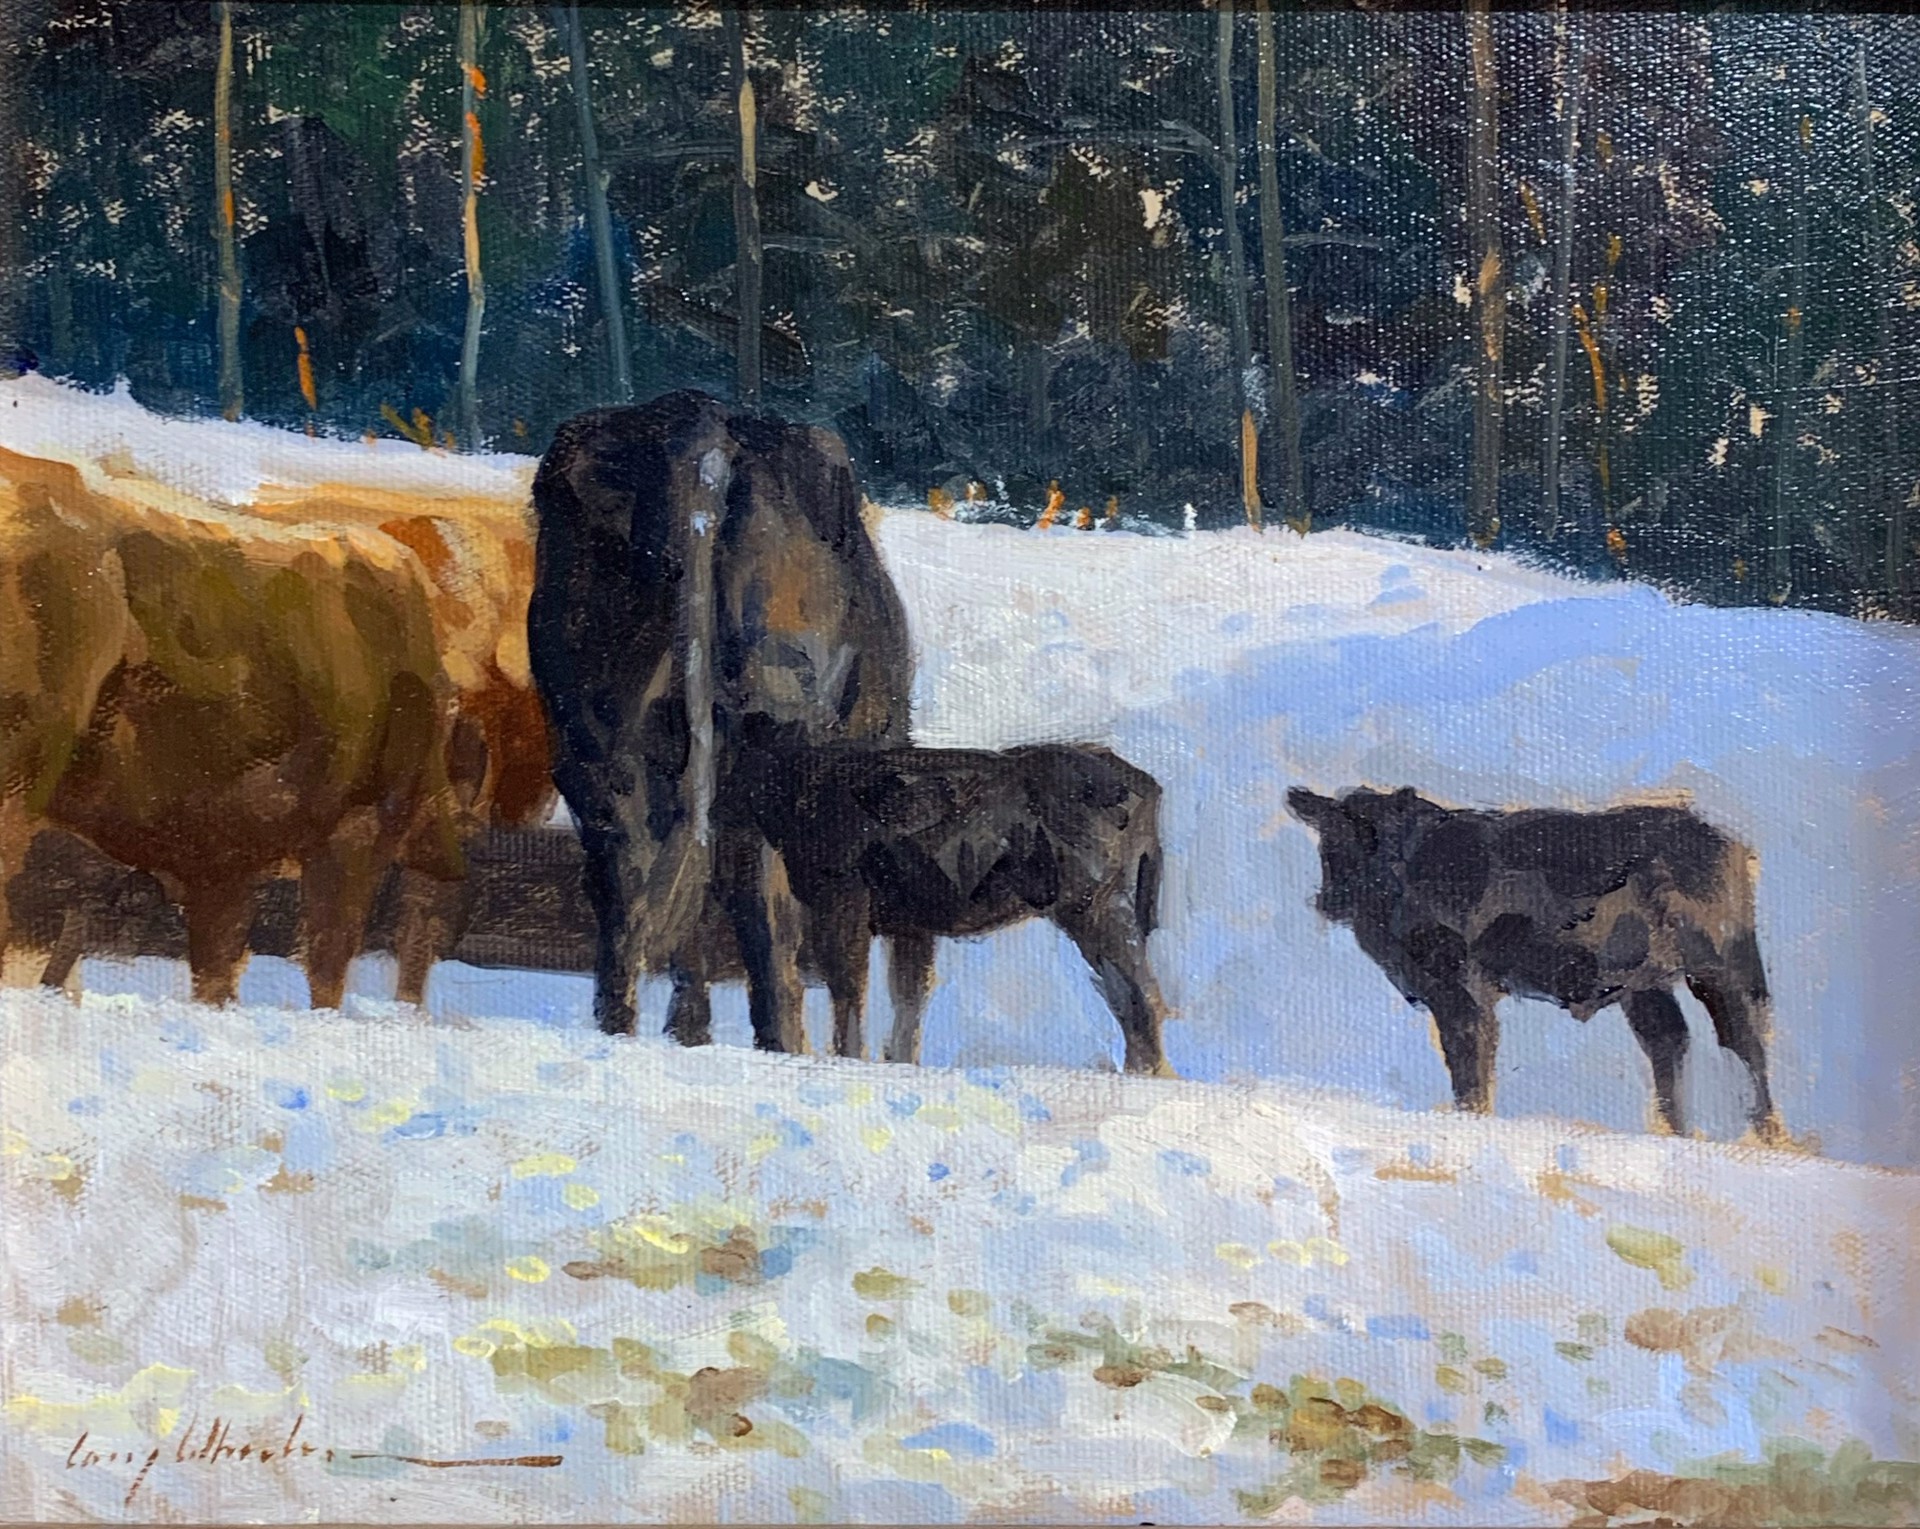 Searching for Food through Kentucky Snow by Larry Wheeler